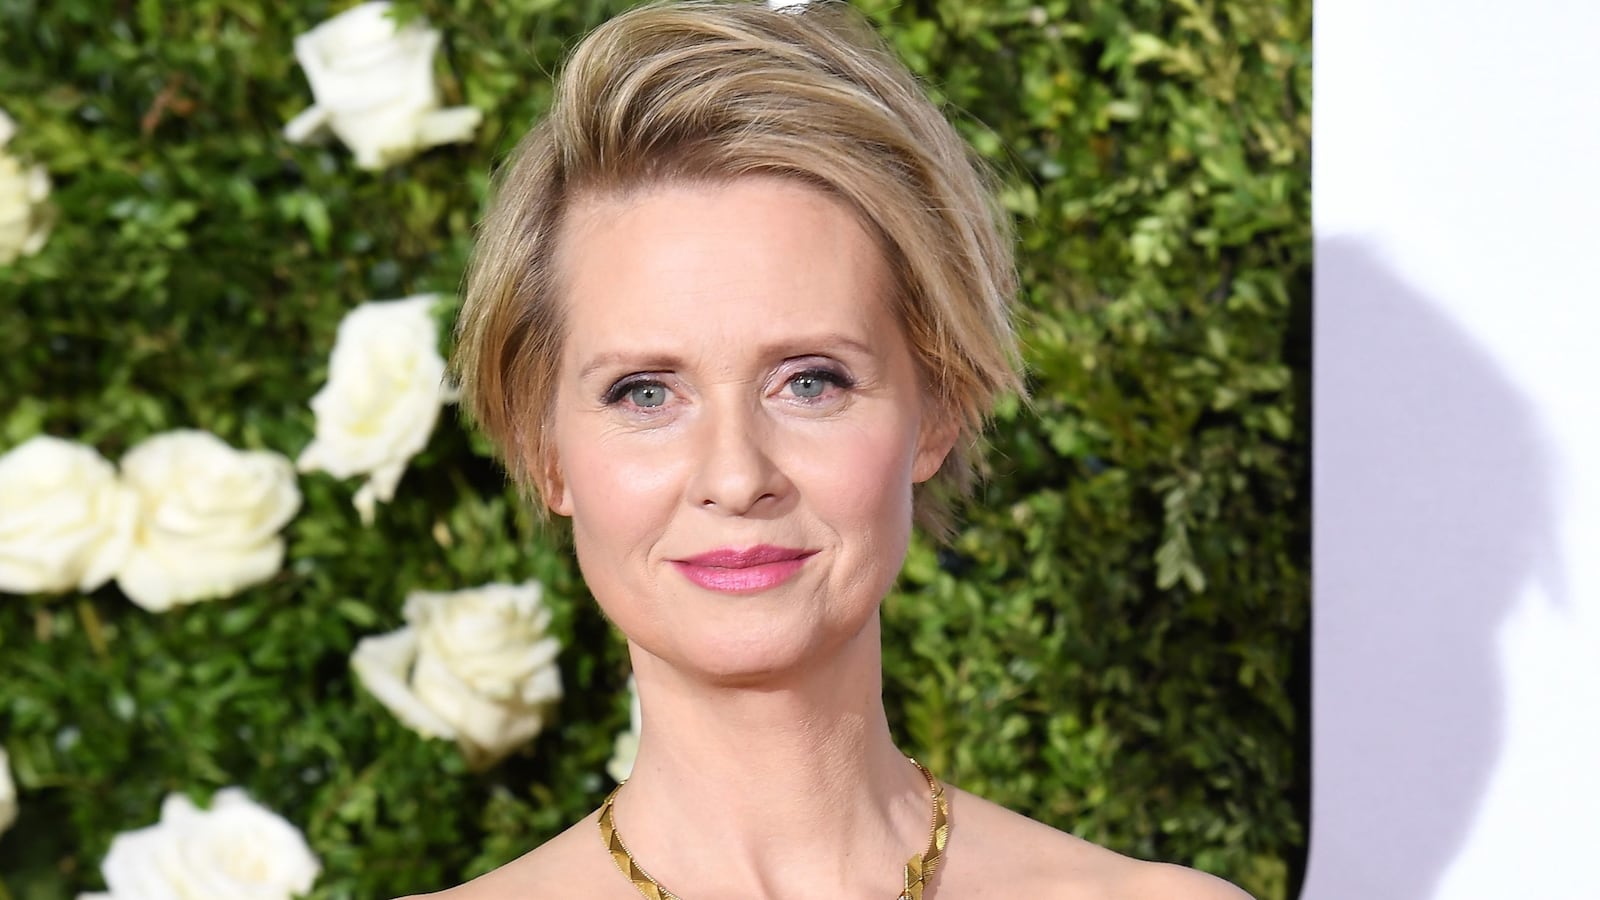 Cynthia Nixon on Monday announced her long-anticipated run for New York governor.